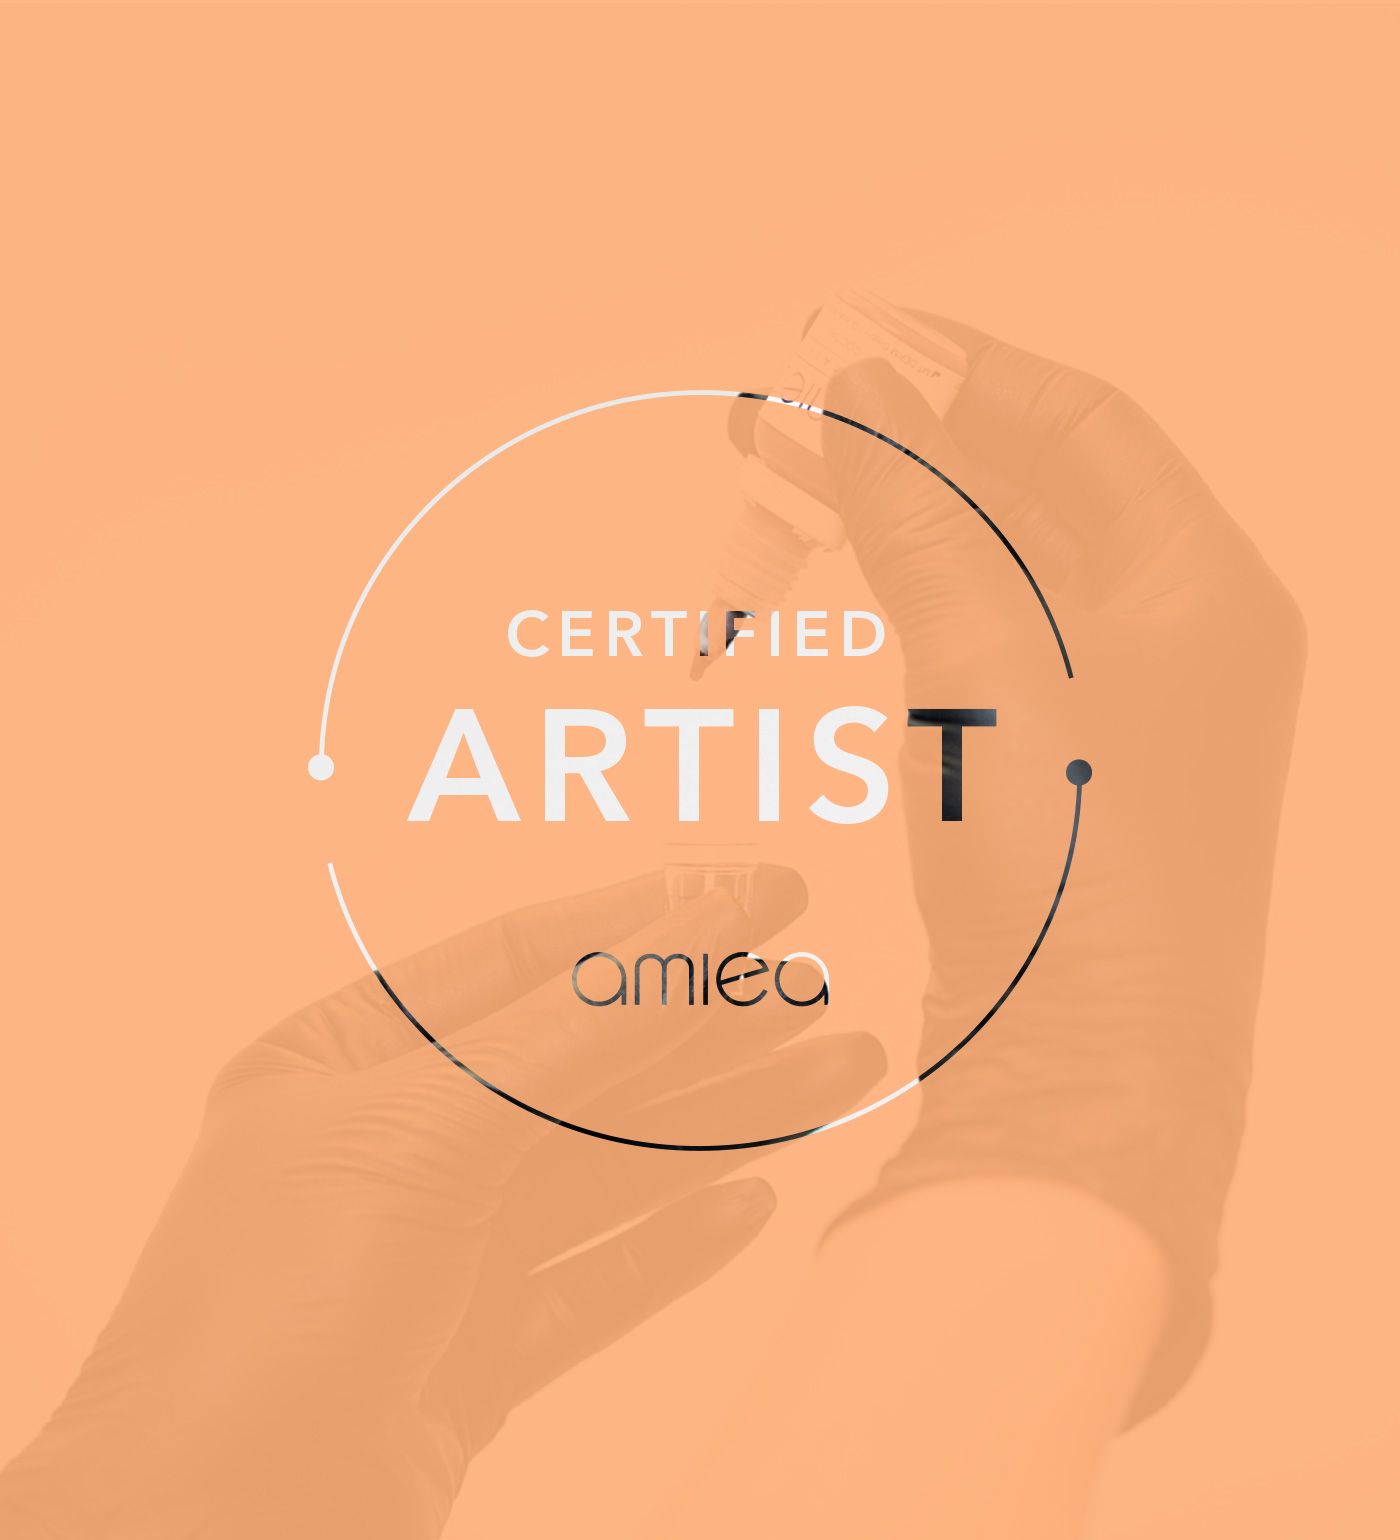 amiea certified Artist logo on peach-colored background